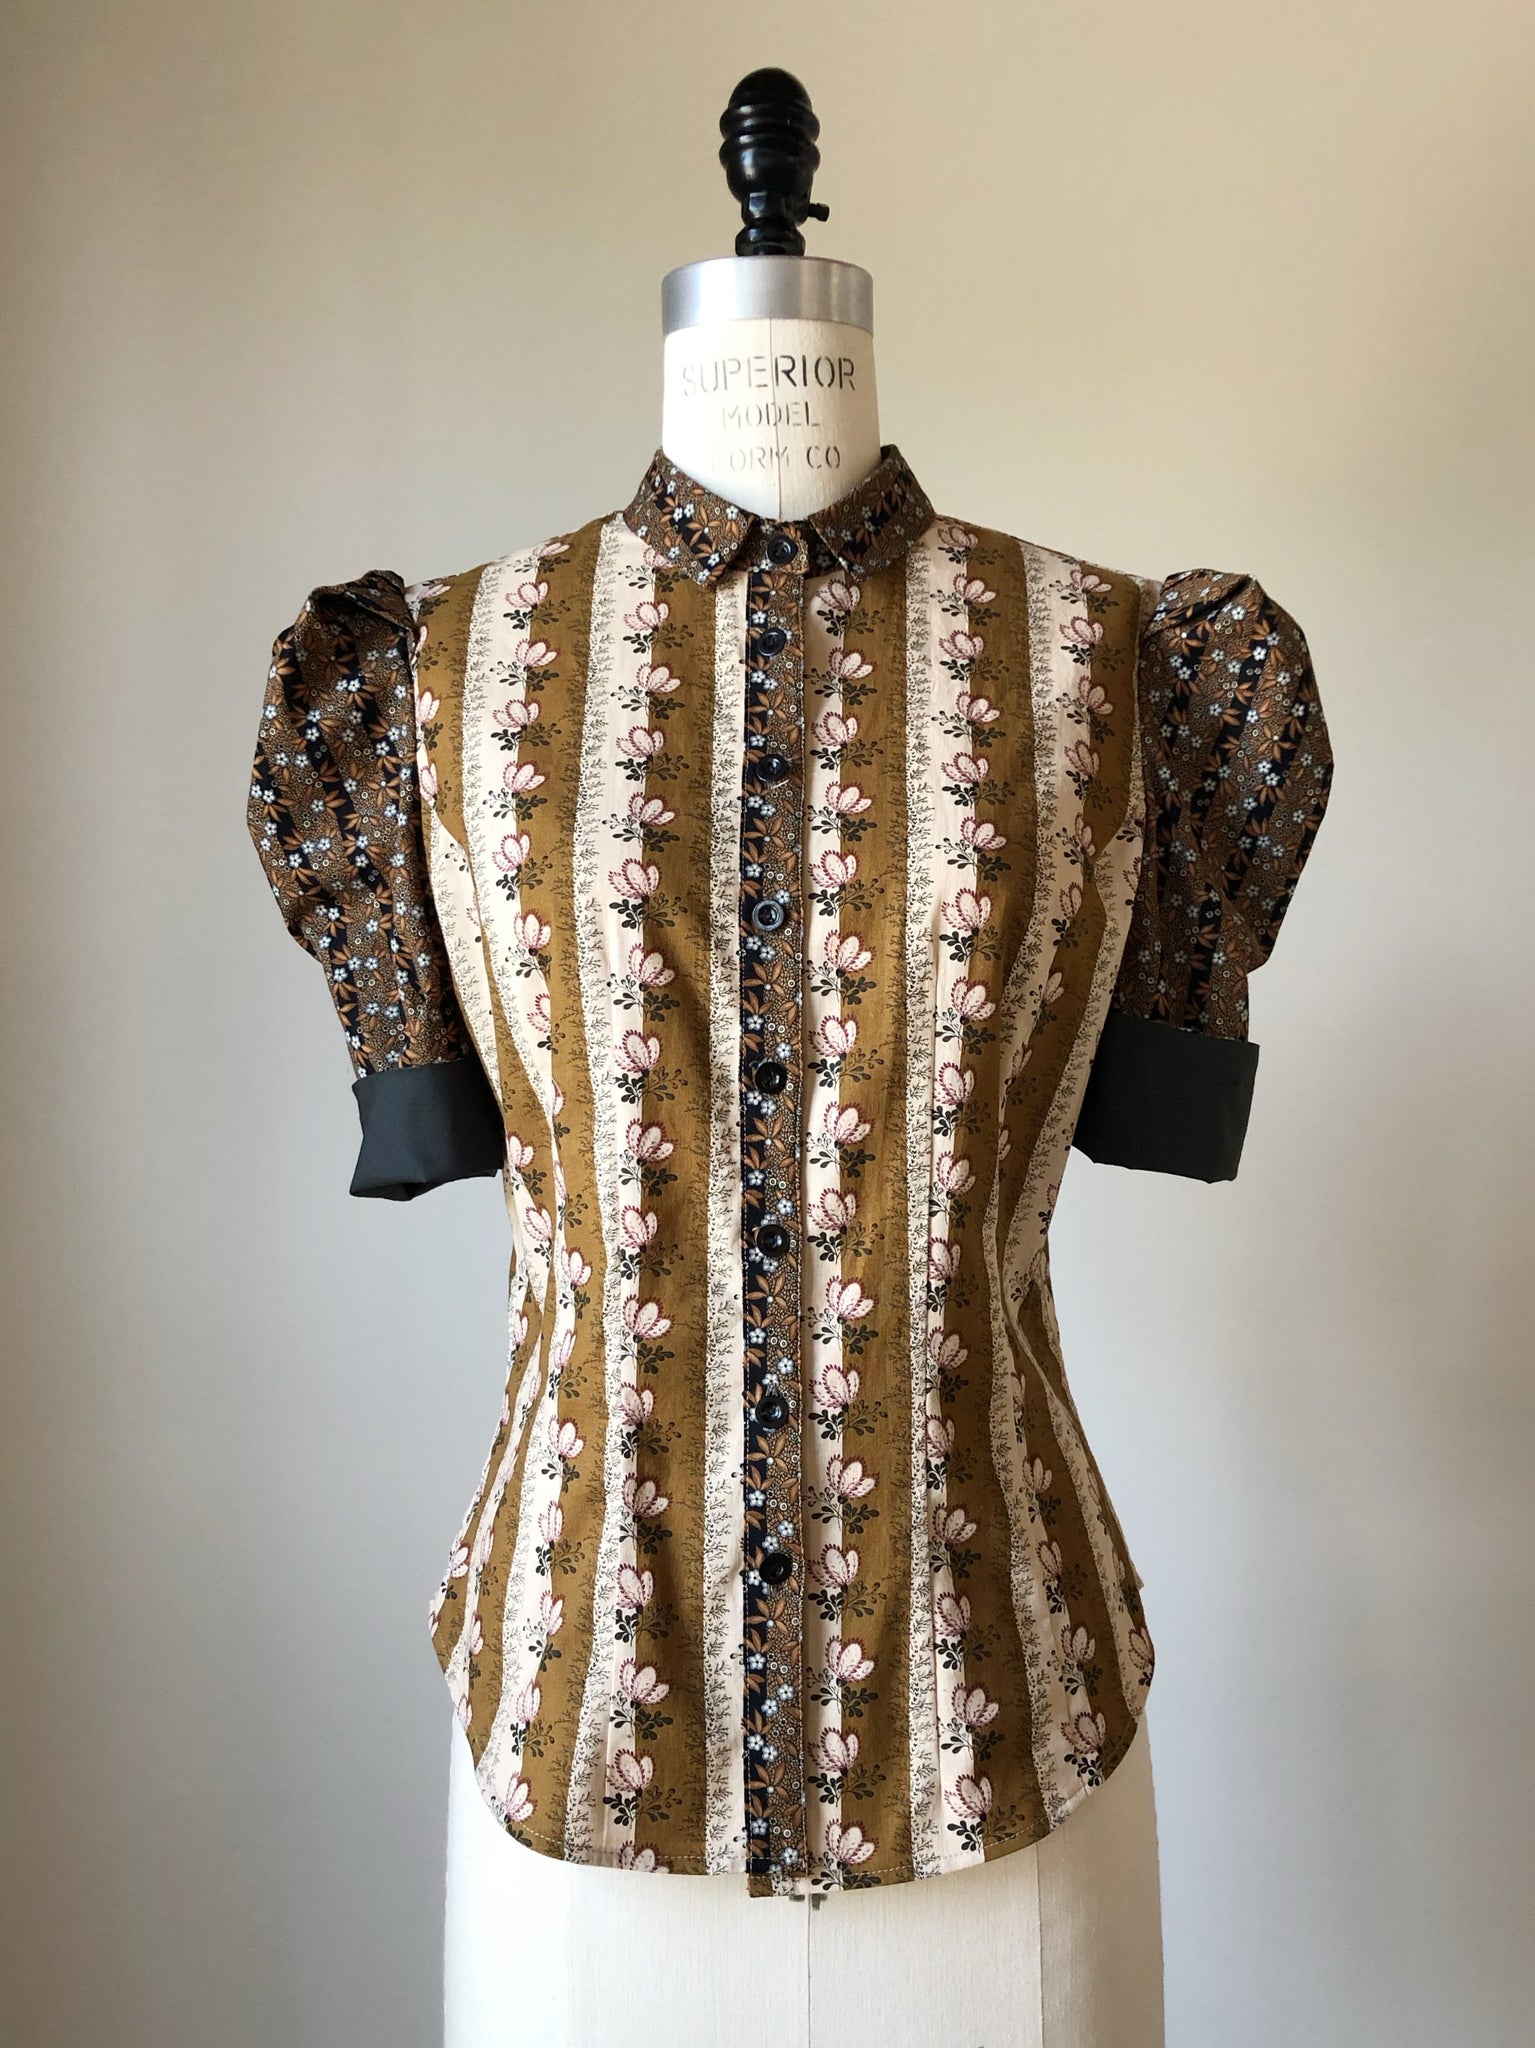 Lillian work shirt in 19th century reproduction prints #2